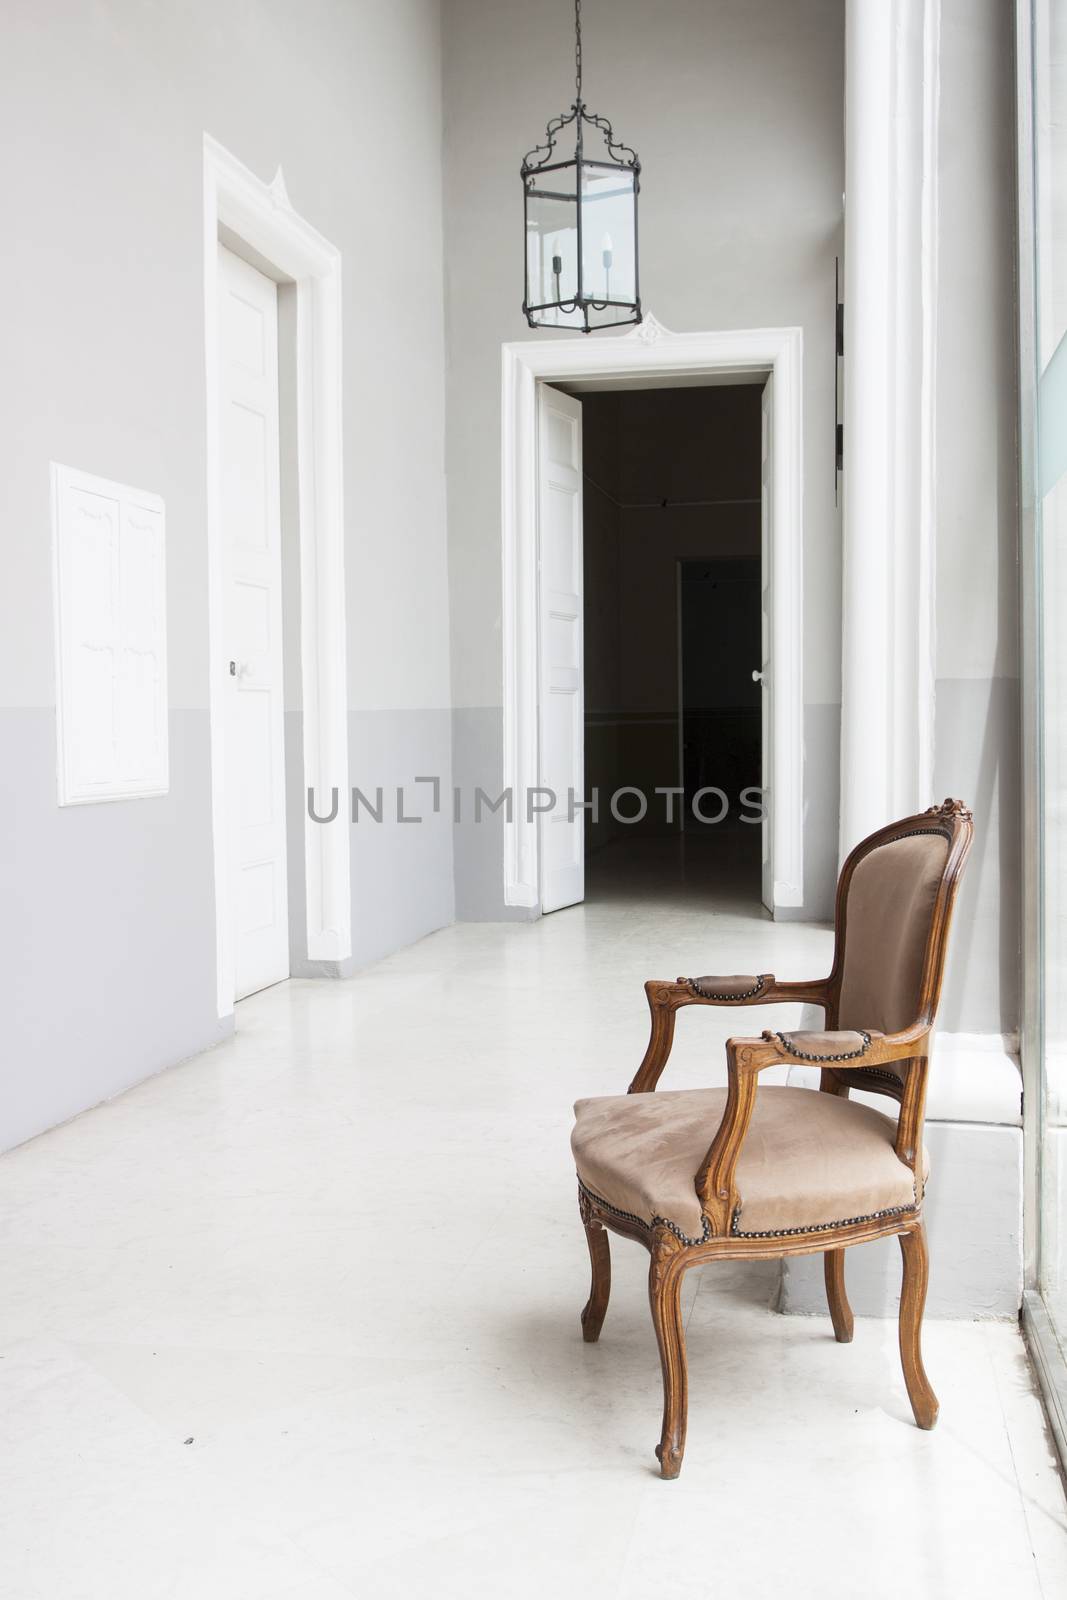 Luxurious palace interior with armchair in Malta by annems